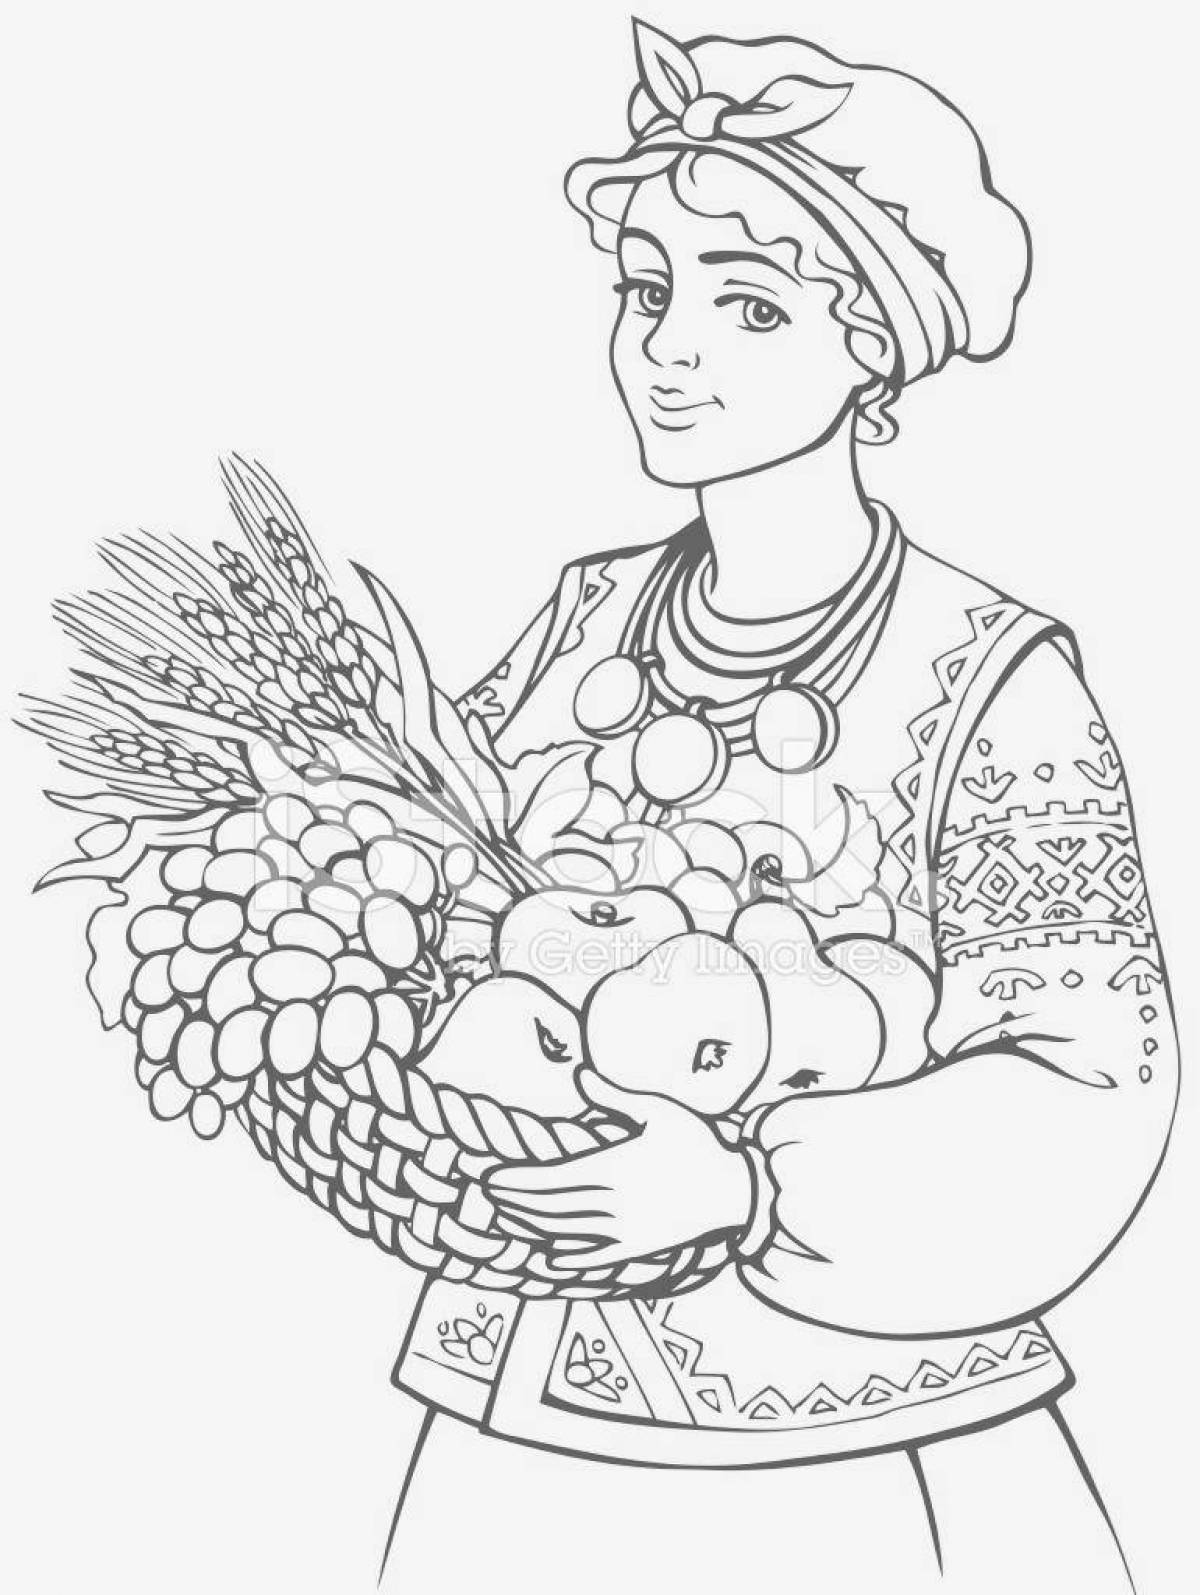 Coloring page charming Cossack